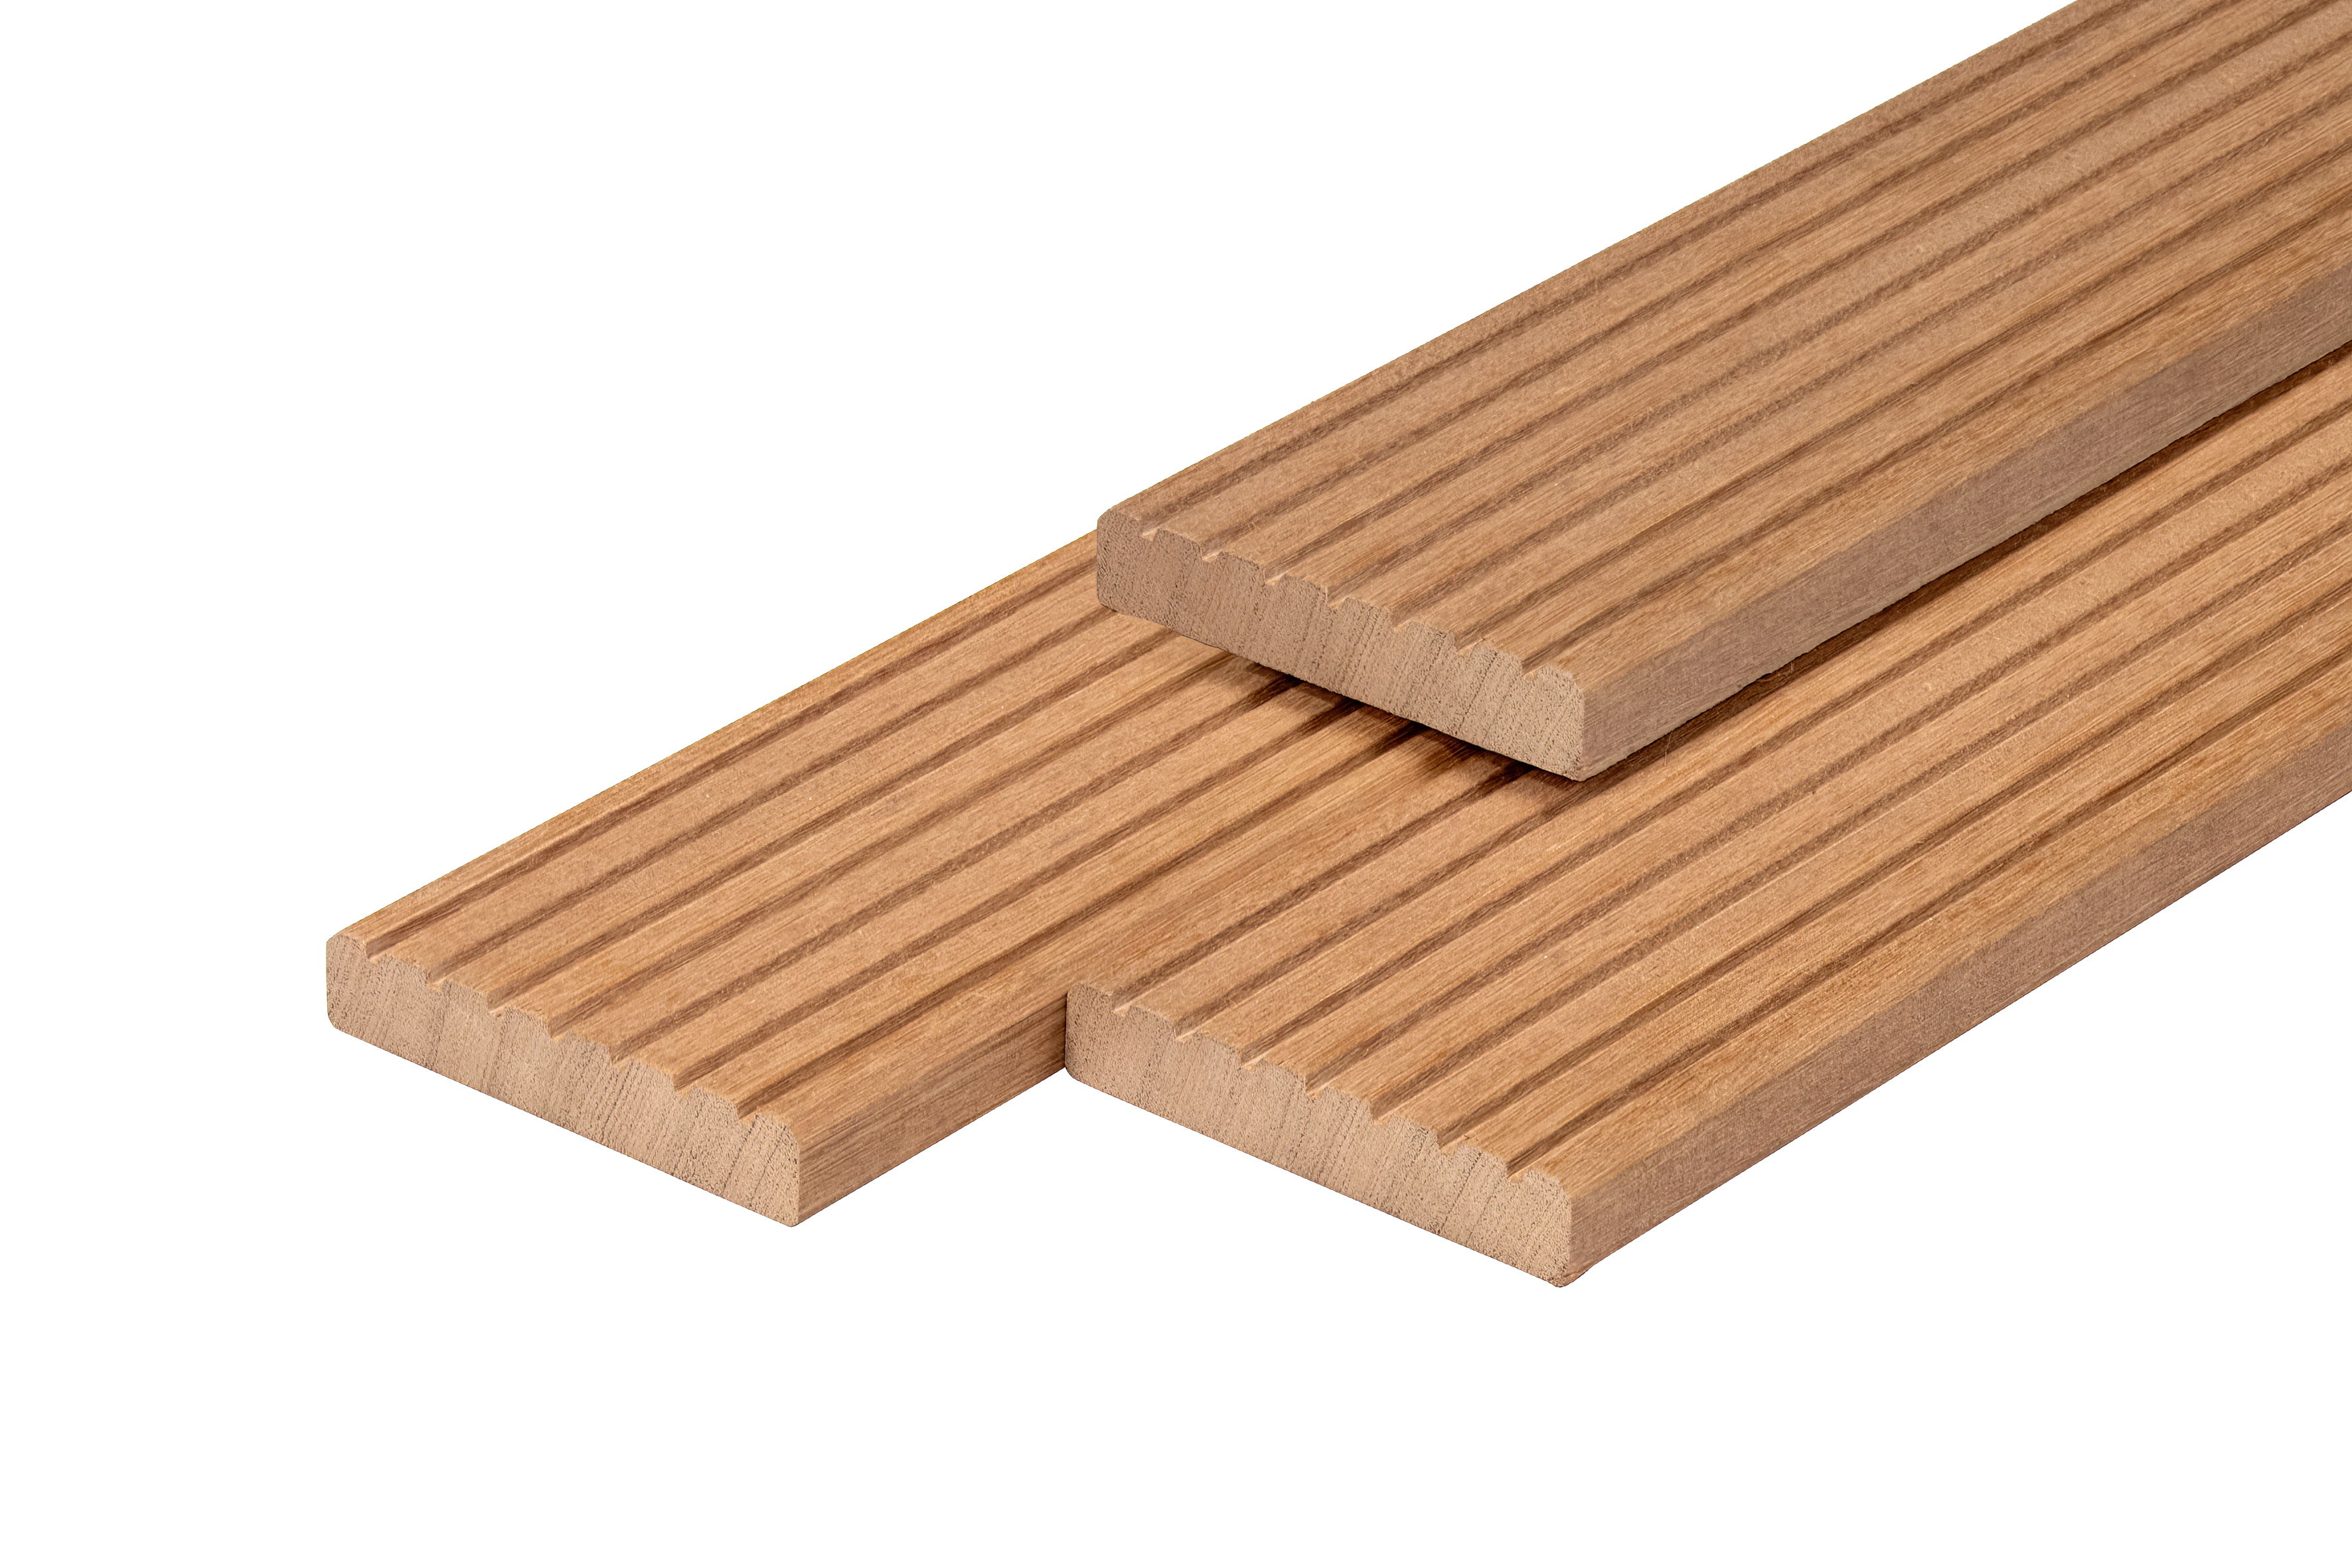 Bangkirai decking board dried 2.5x14.5x305 cm planed 7 grooves + 1 side smooth